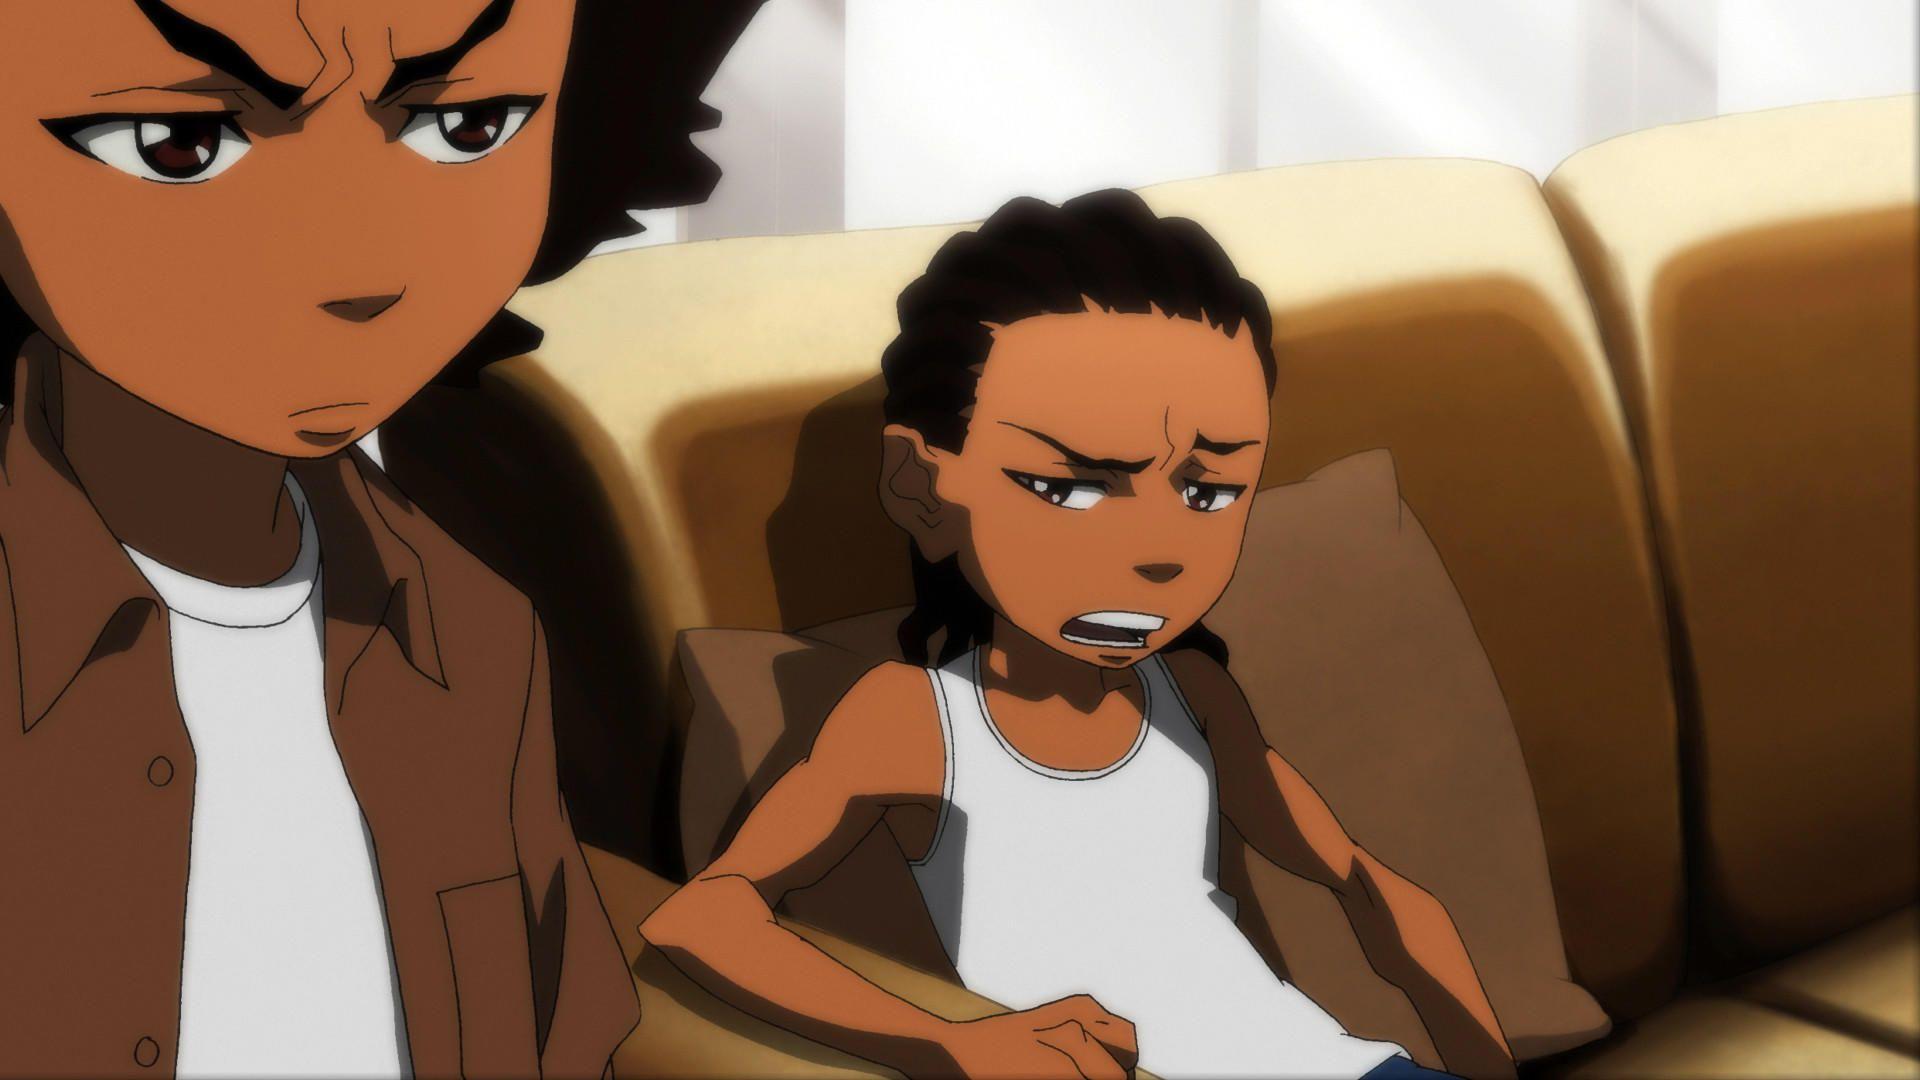 The Boondocks' returns, but without creator Aaron McGruder